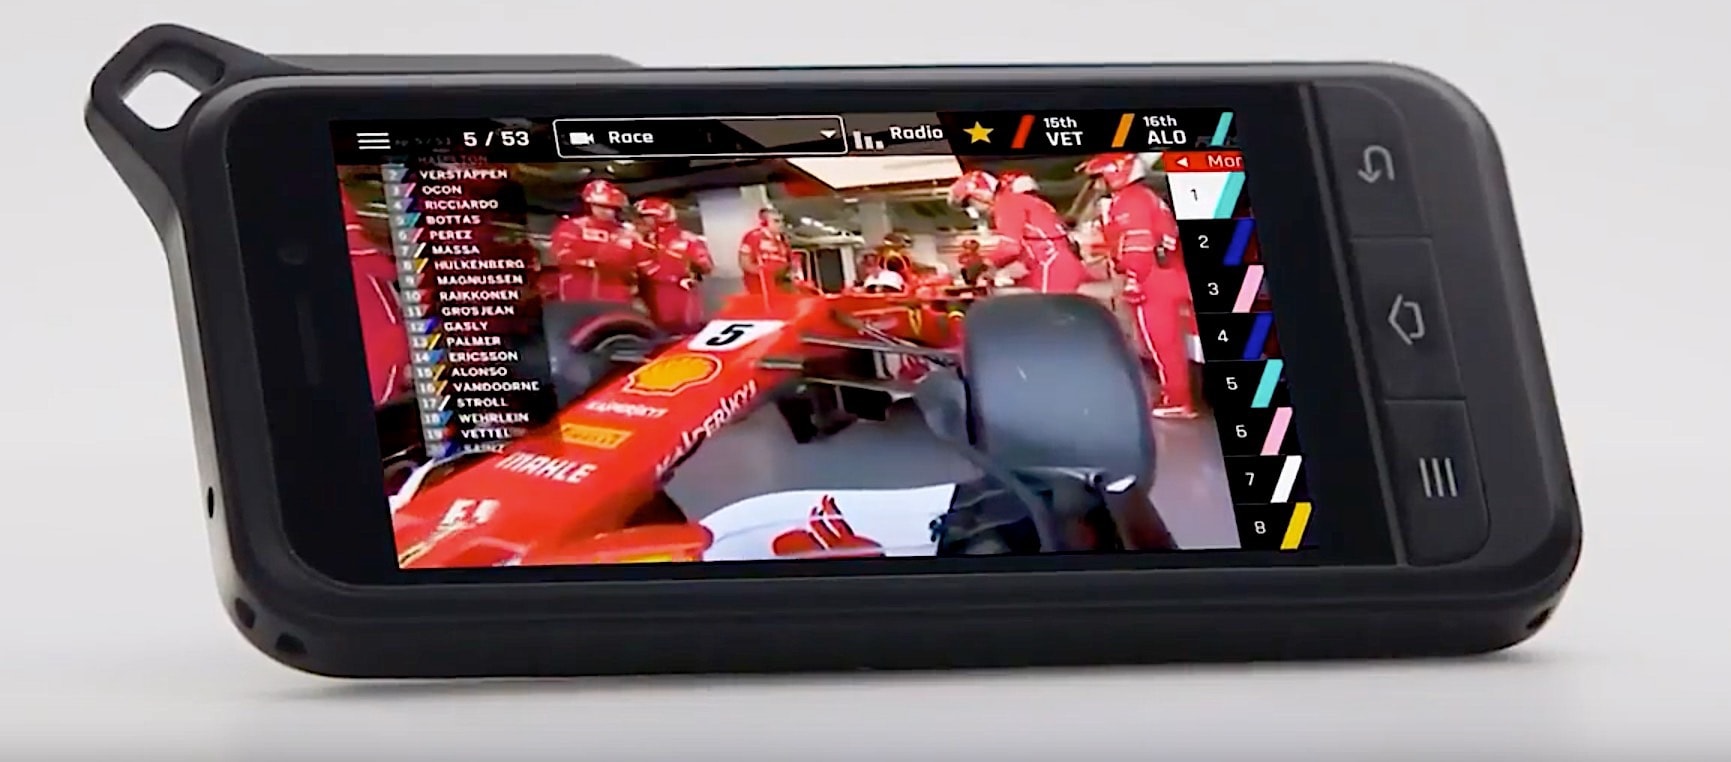 https://s1.cdn.autoevolution.com/images/news/formula-1-vision-device-to-enhance-spectator-experience-during-gps-125592_1.jpg